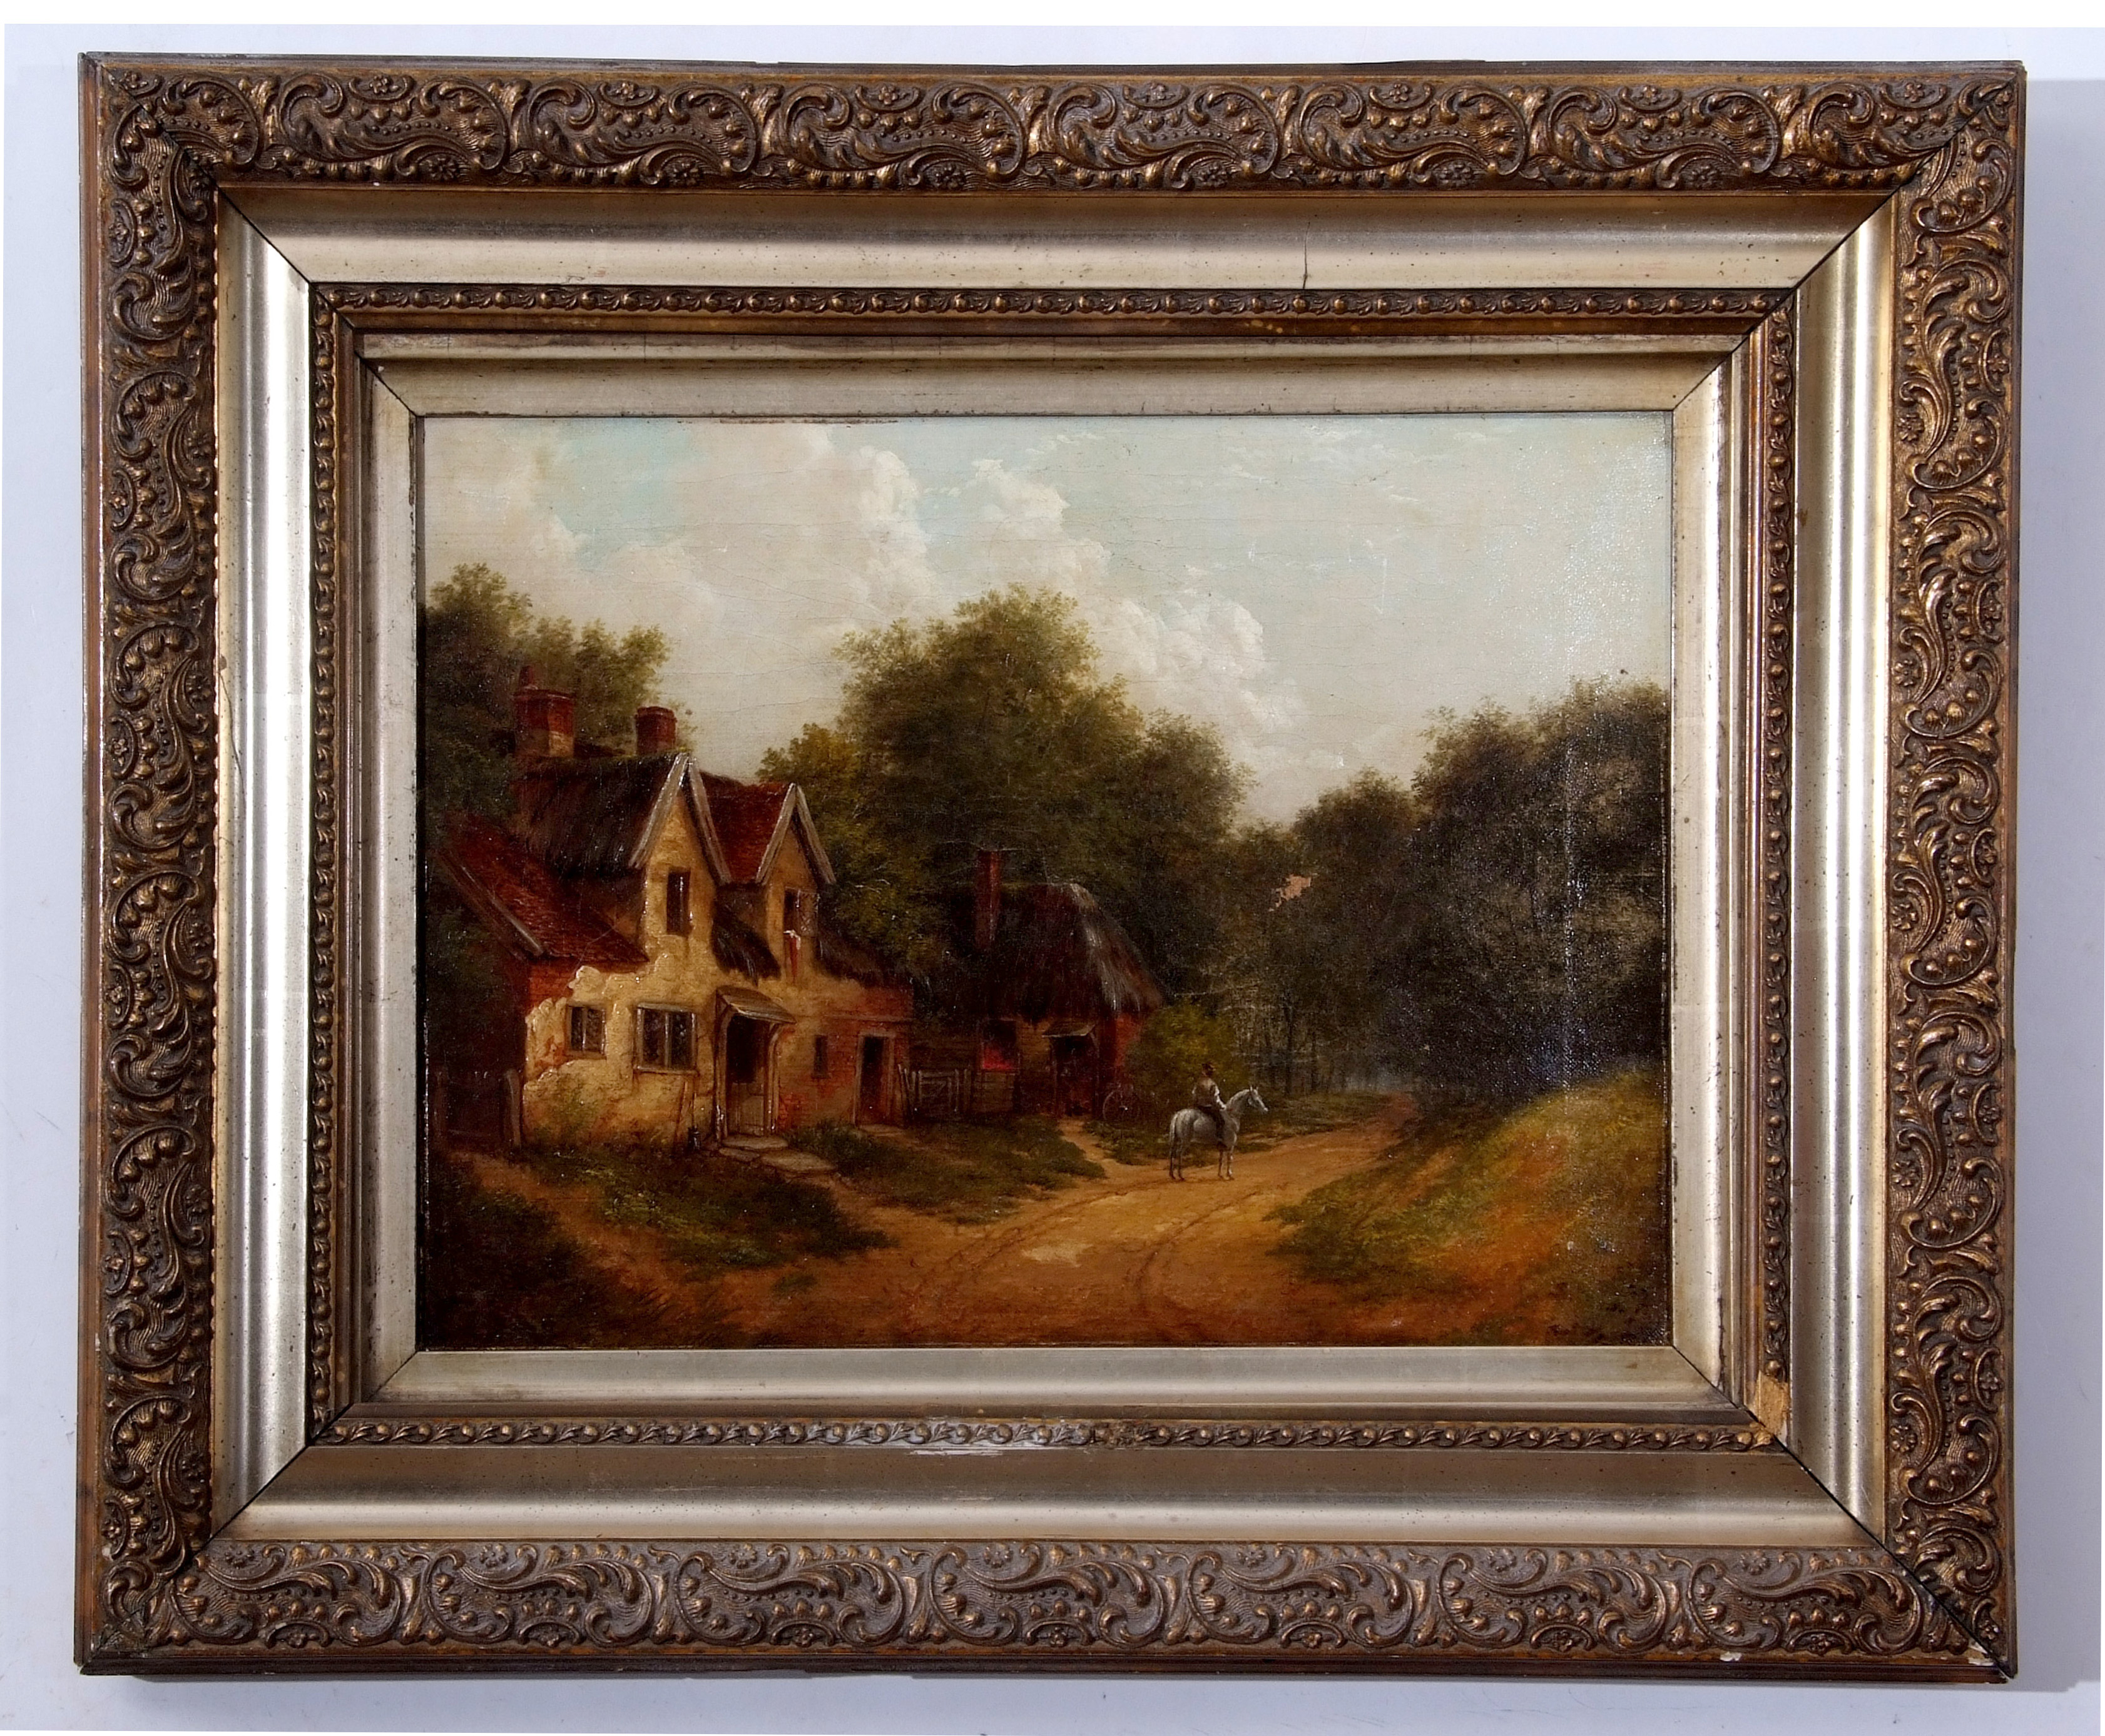 Norwich School (19th century), Wooded landscape with horse, figure on horseback by a cottage, oil on